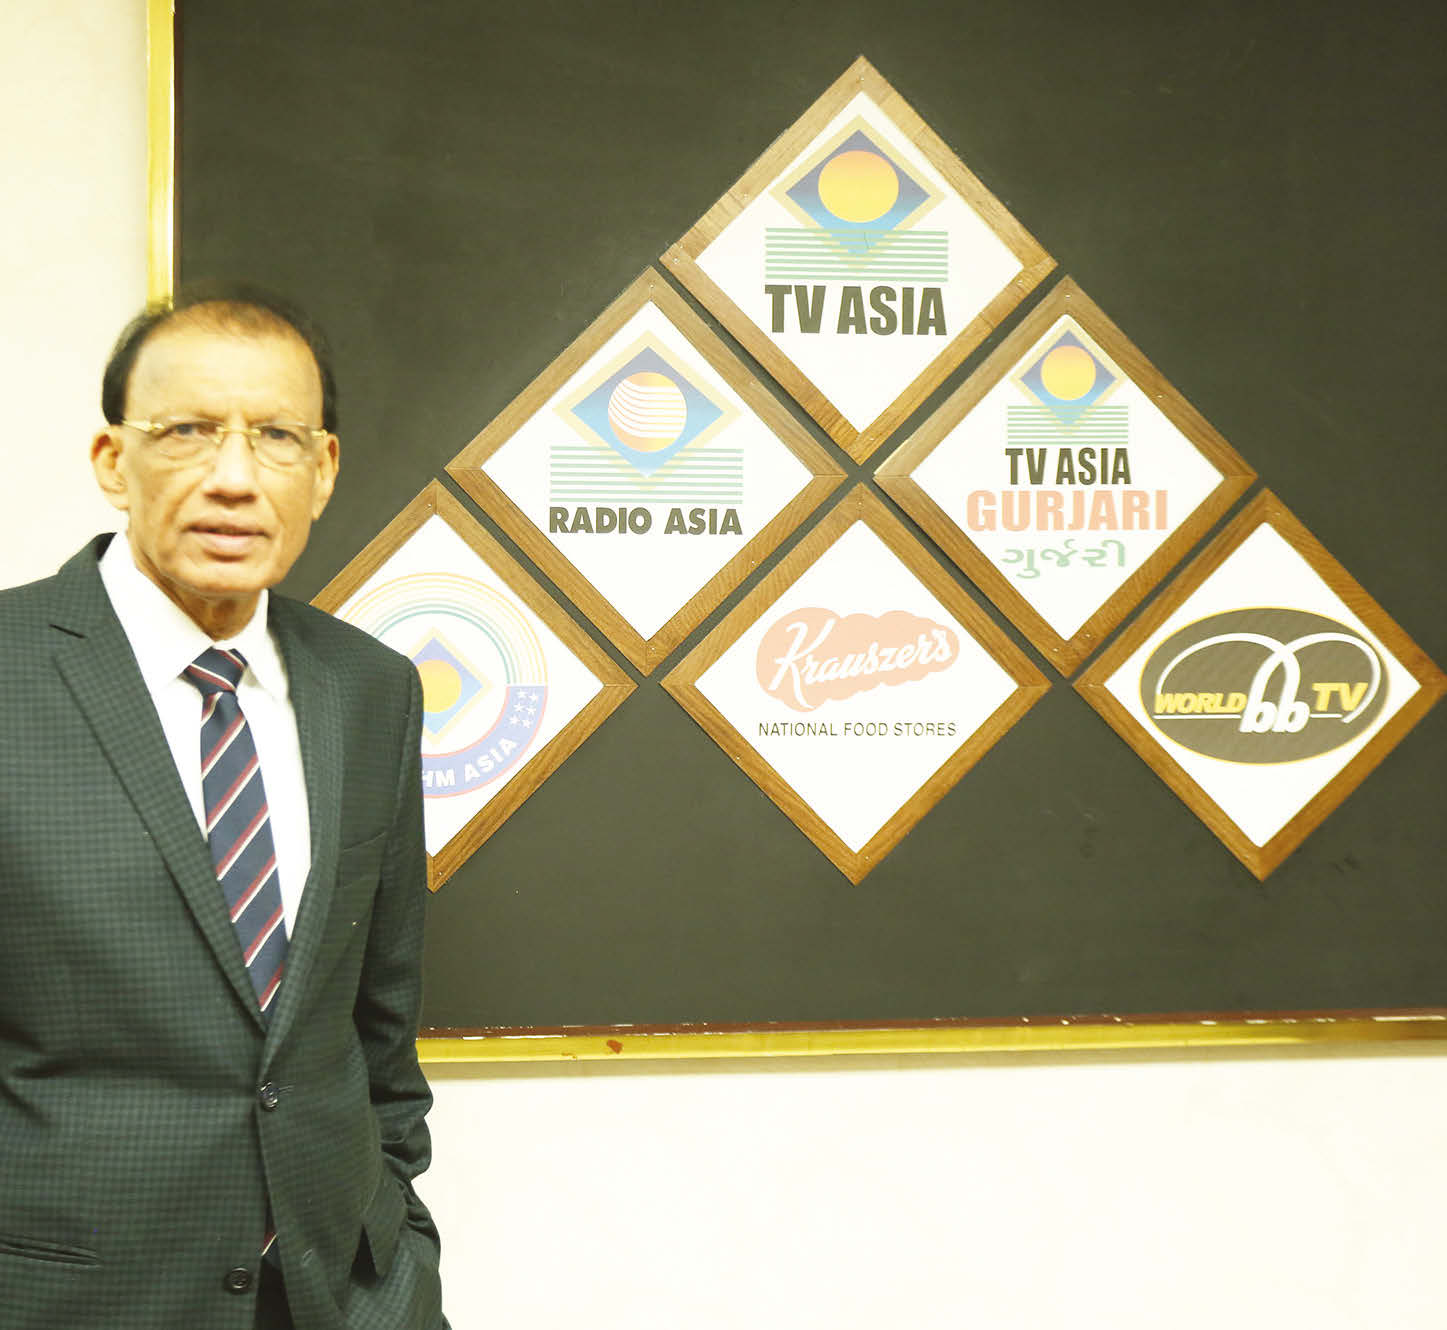 Mr. HR Shah, Chairman of TV Asia is a successful entrepreneur, philanthropist and community leader